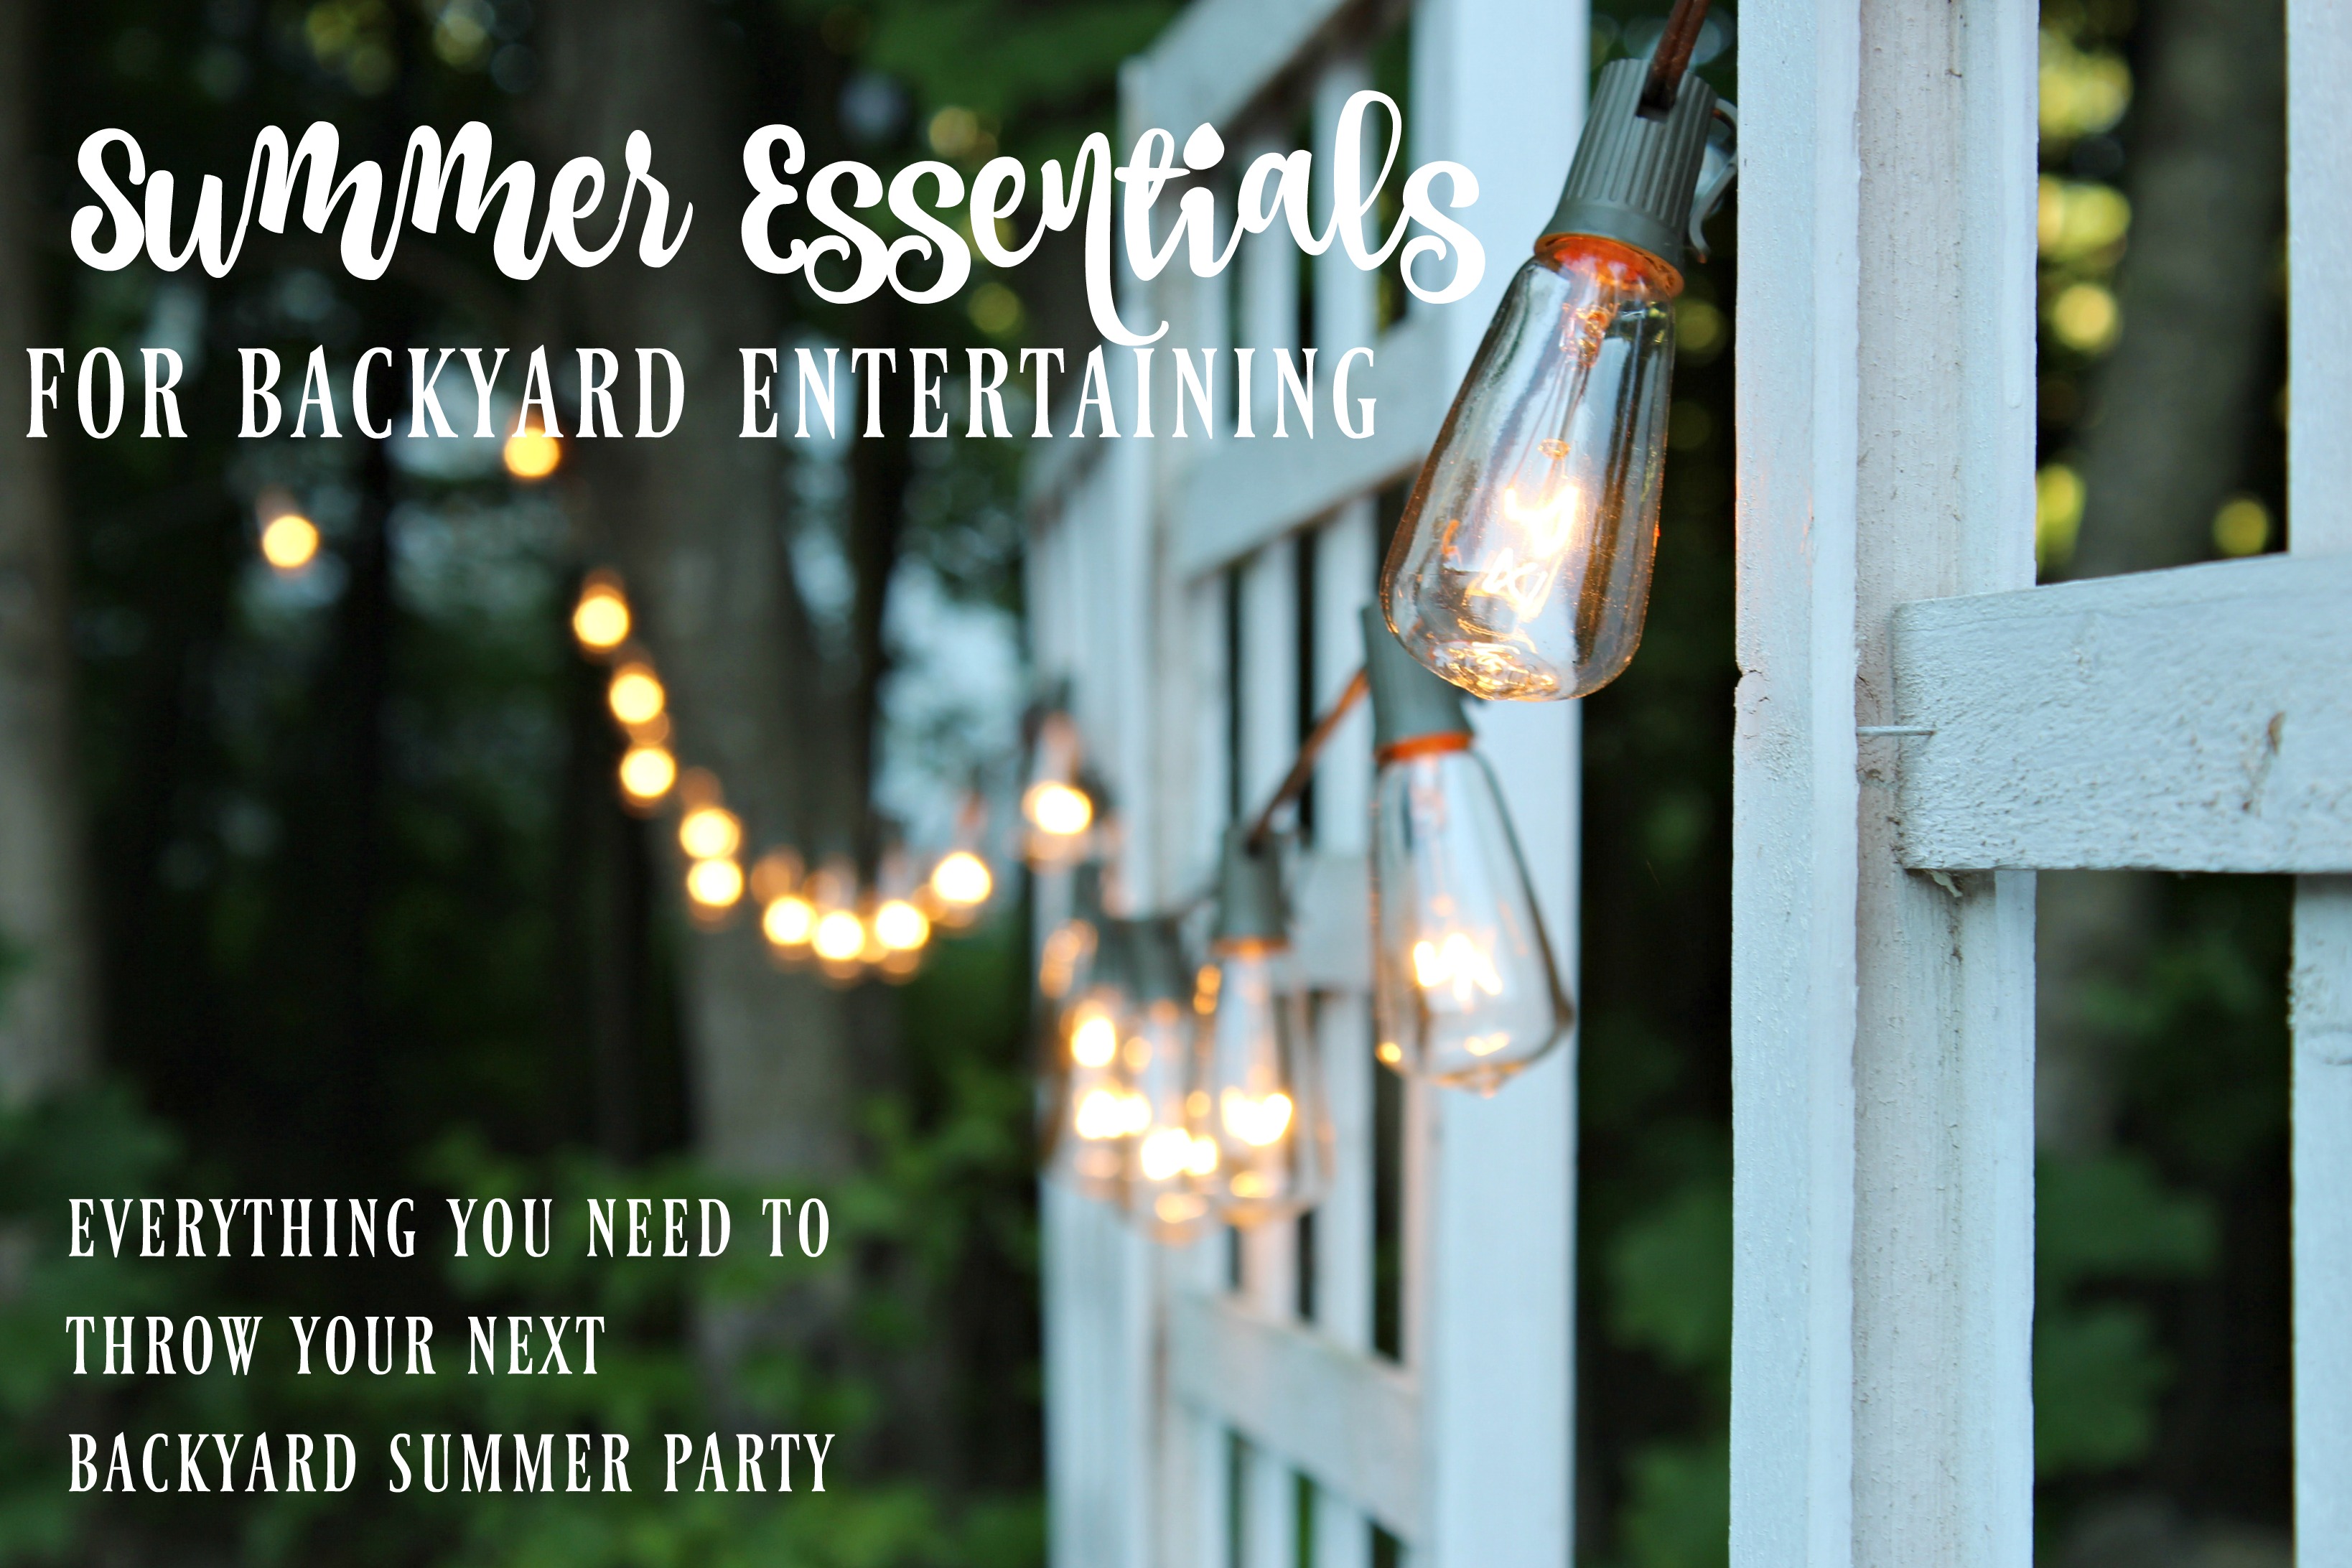 Summer Essentials for Backyard Entertaining | Rooms FOR Rent Blog